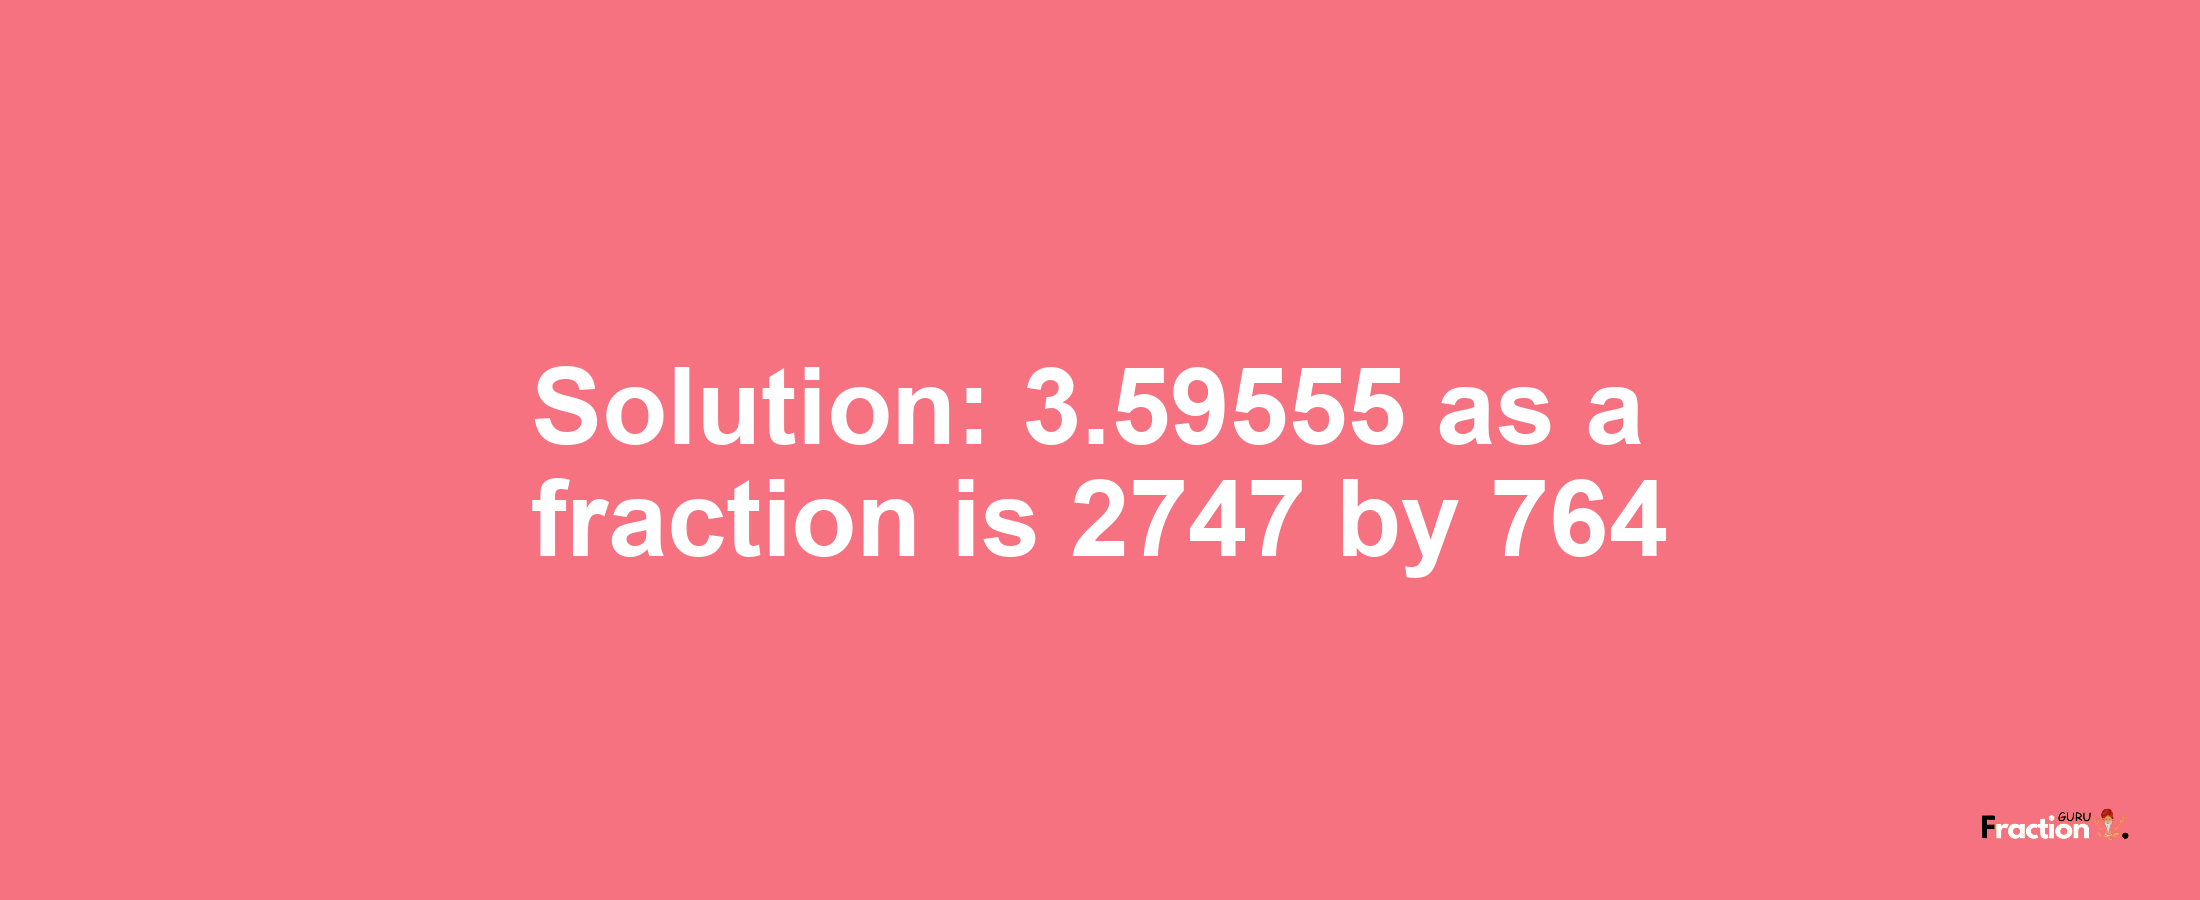 Solution:3.59555 as a fraction is 2747/764